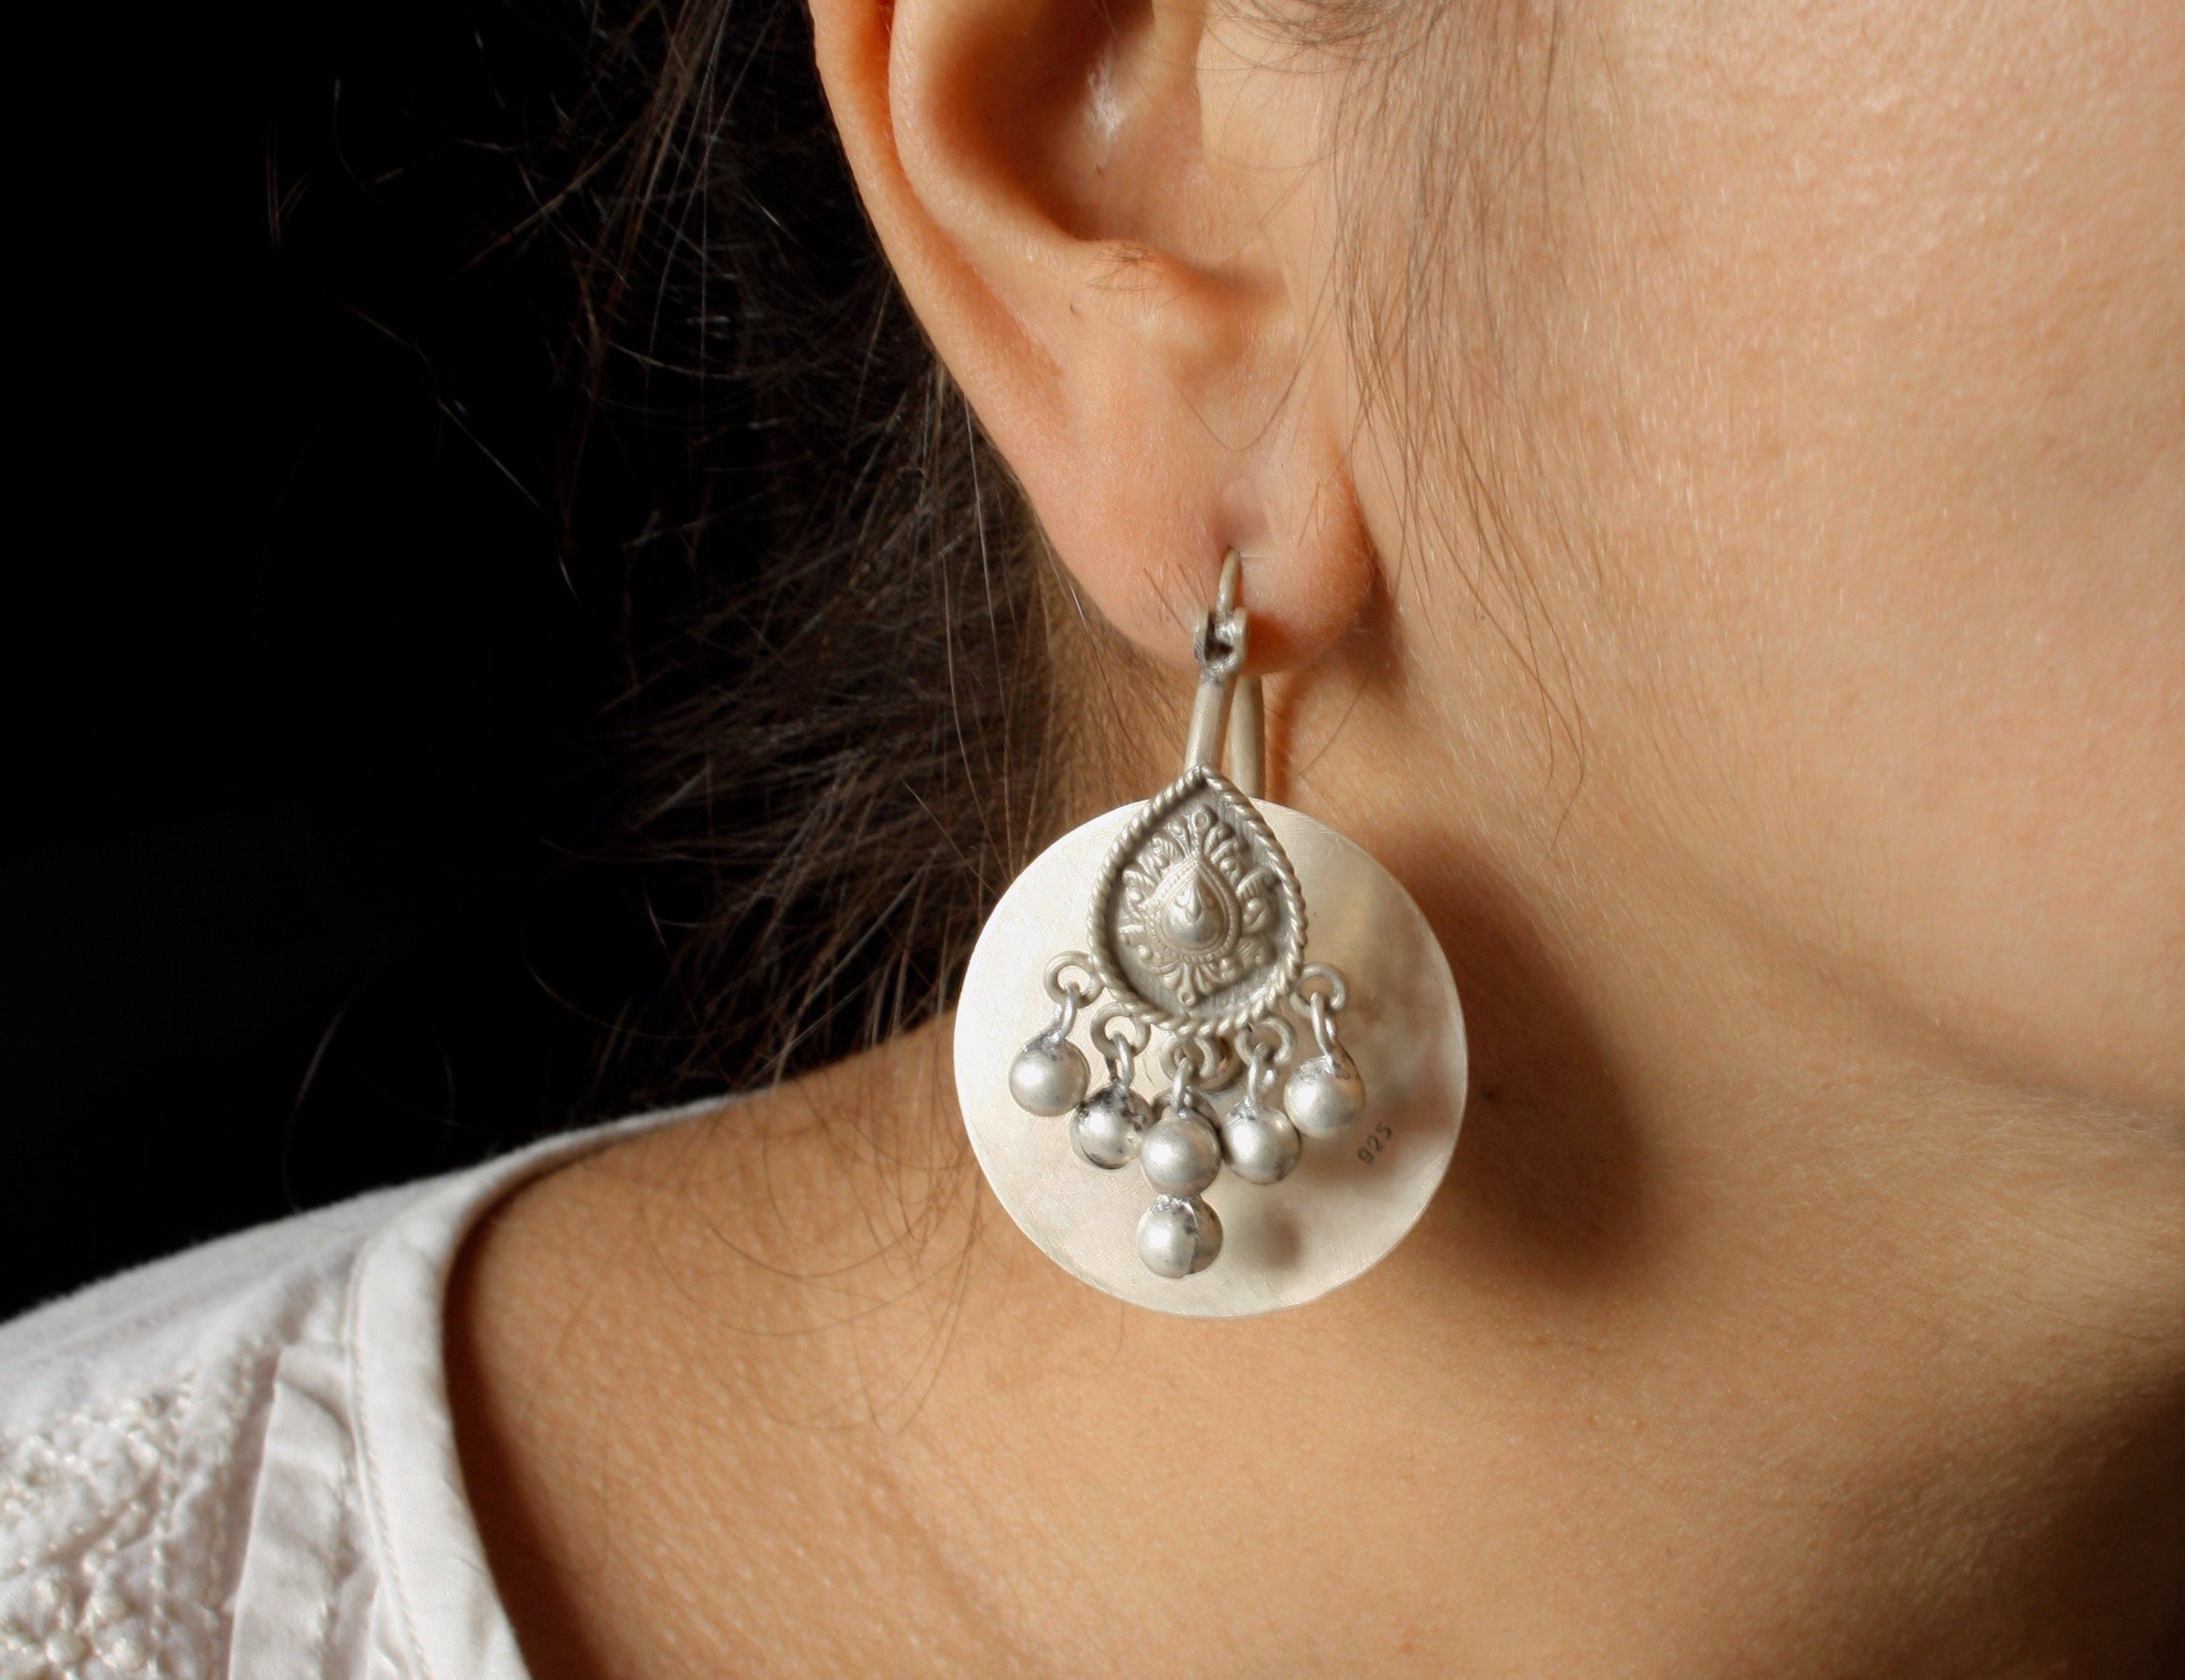 Buy Quirky Silver Earrings Online in India - Gramophone Earrings - Quirksmith